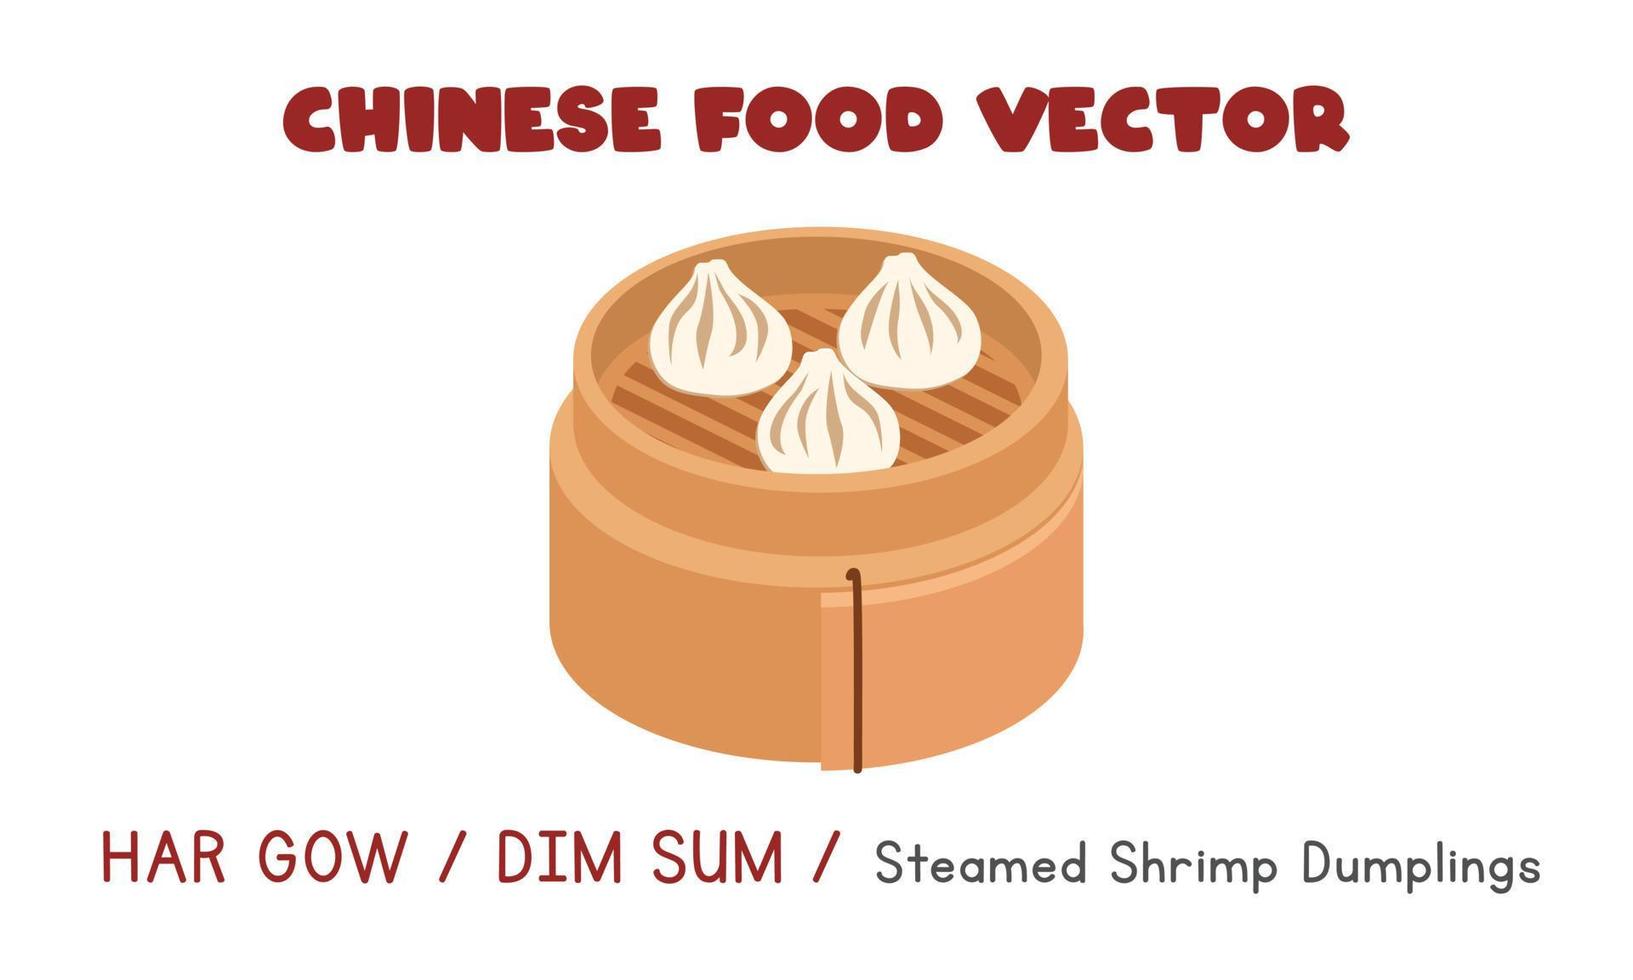 Chinese Har Gow or Dim Sum - Chinese Steamed Shrimp Dumplings in a bamboo steamer flat vector design illustration, clipart cartoon style. Asian food. Chinese cuisine. Chinese food